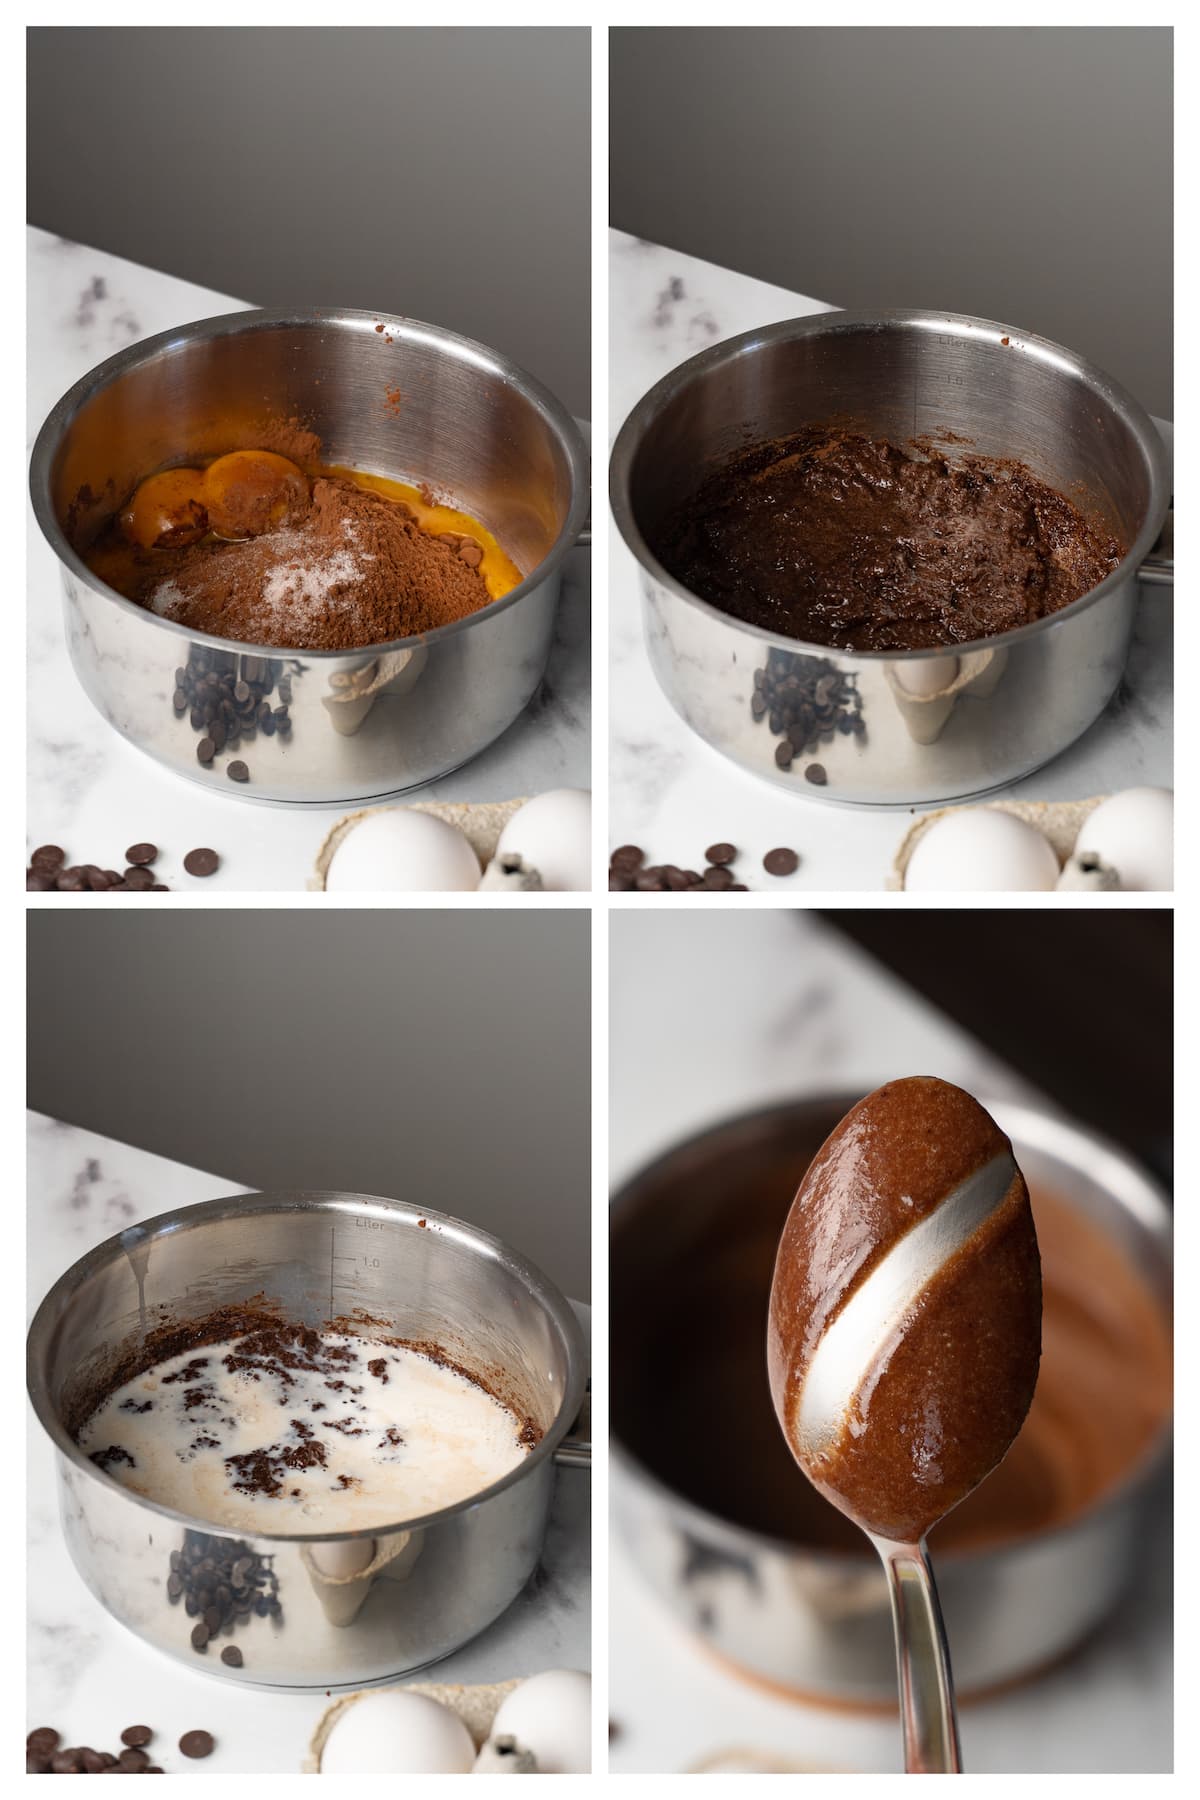 The collage image shows four steps to make chocolate egg yolk custard for chocolate ice cream.